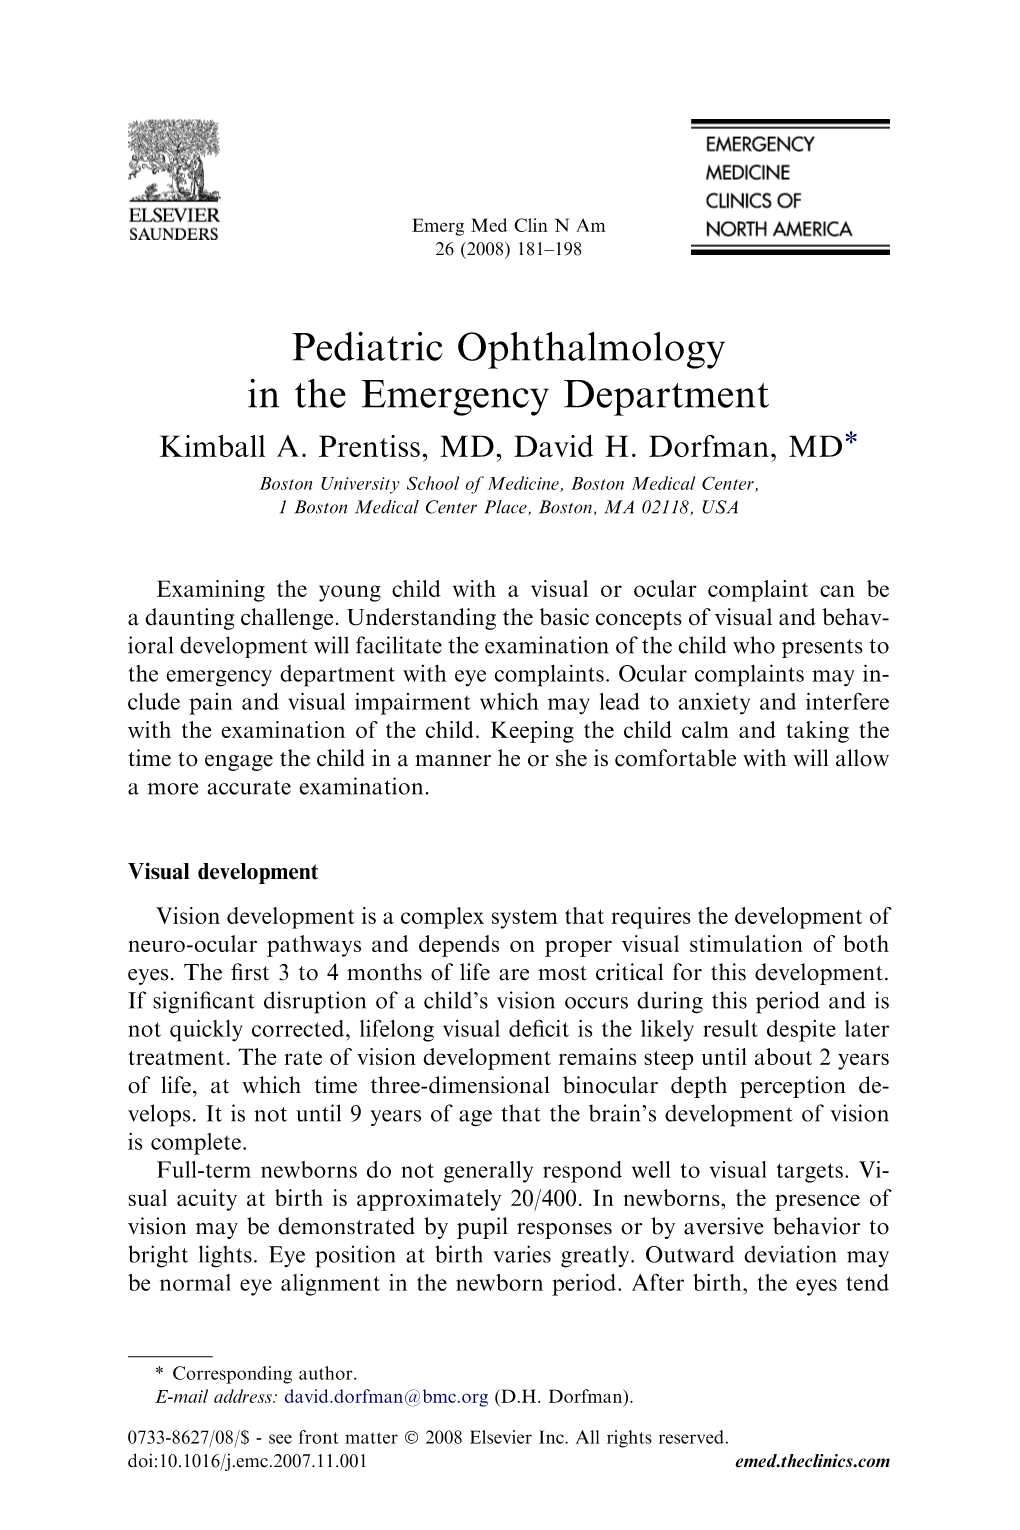 Pediatric Ophthalmology in the Emergency Department Kimball A